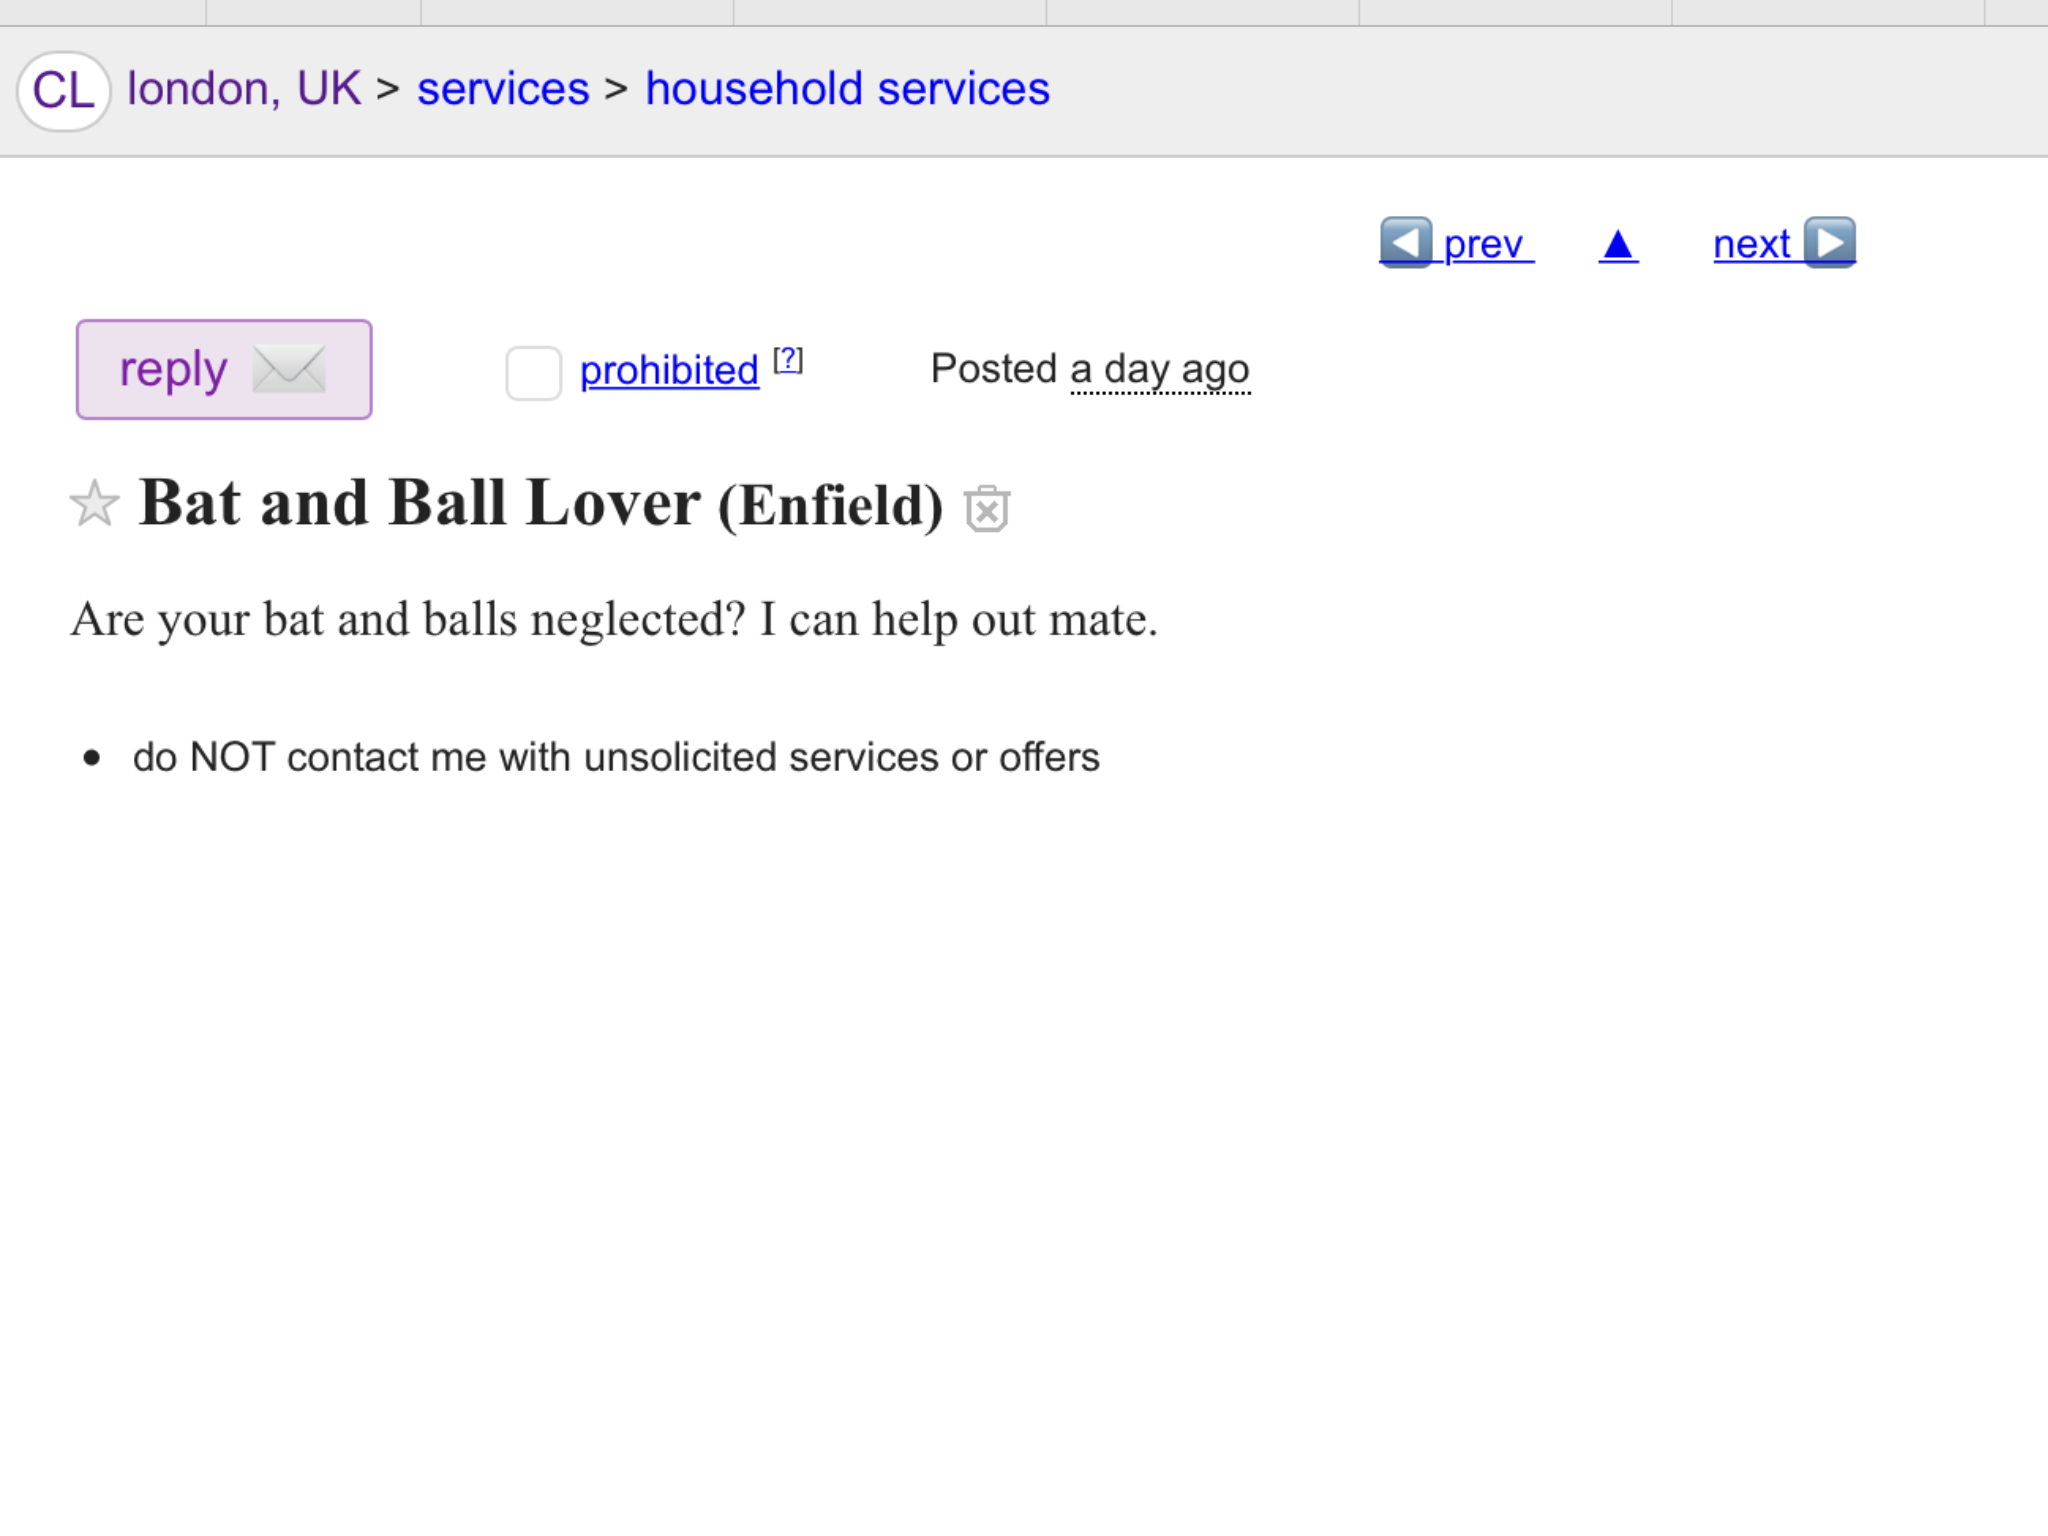 craigslist ad on number - Cl london, Uk > services > household services prev prev A next D v prohibited 2 Posted a day ago Bat and Ball Lover Enfield Are your bat and balls neglected? I can help out mate. do Not contact me with unsolicited services or off